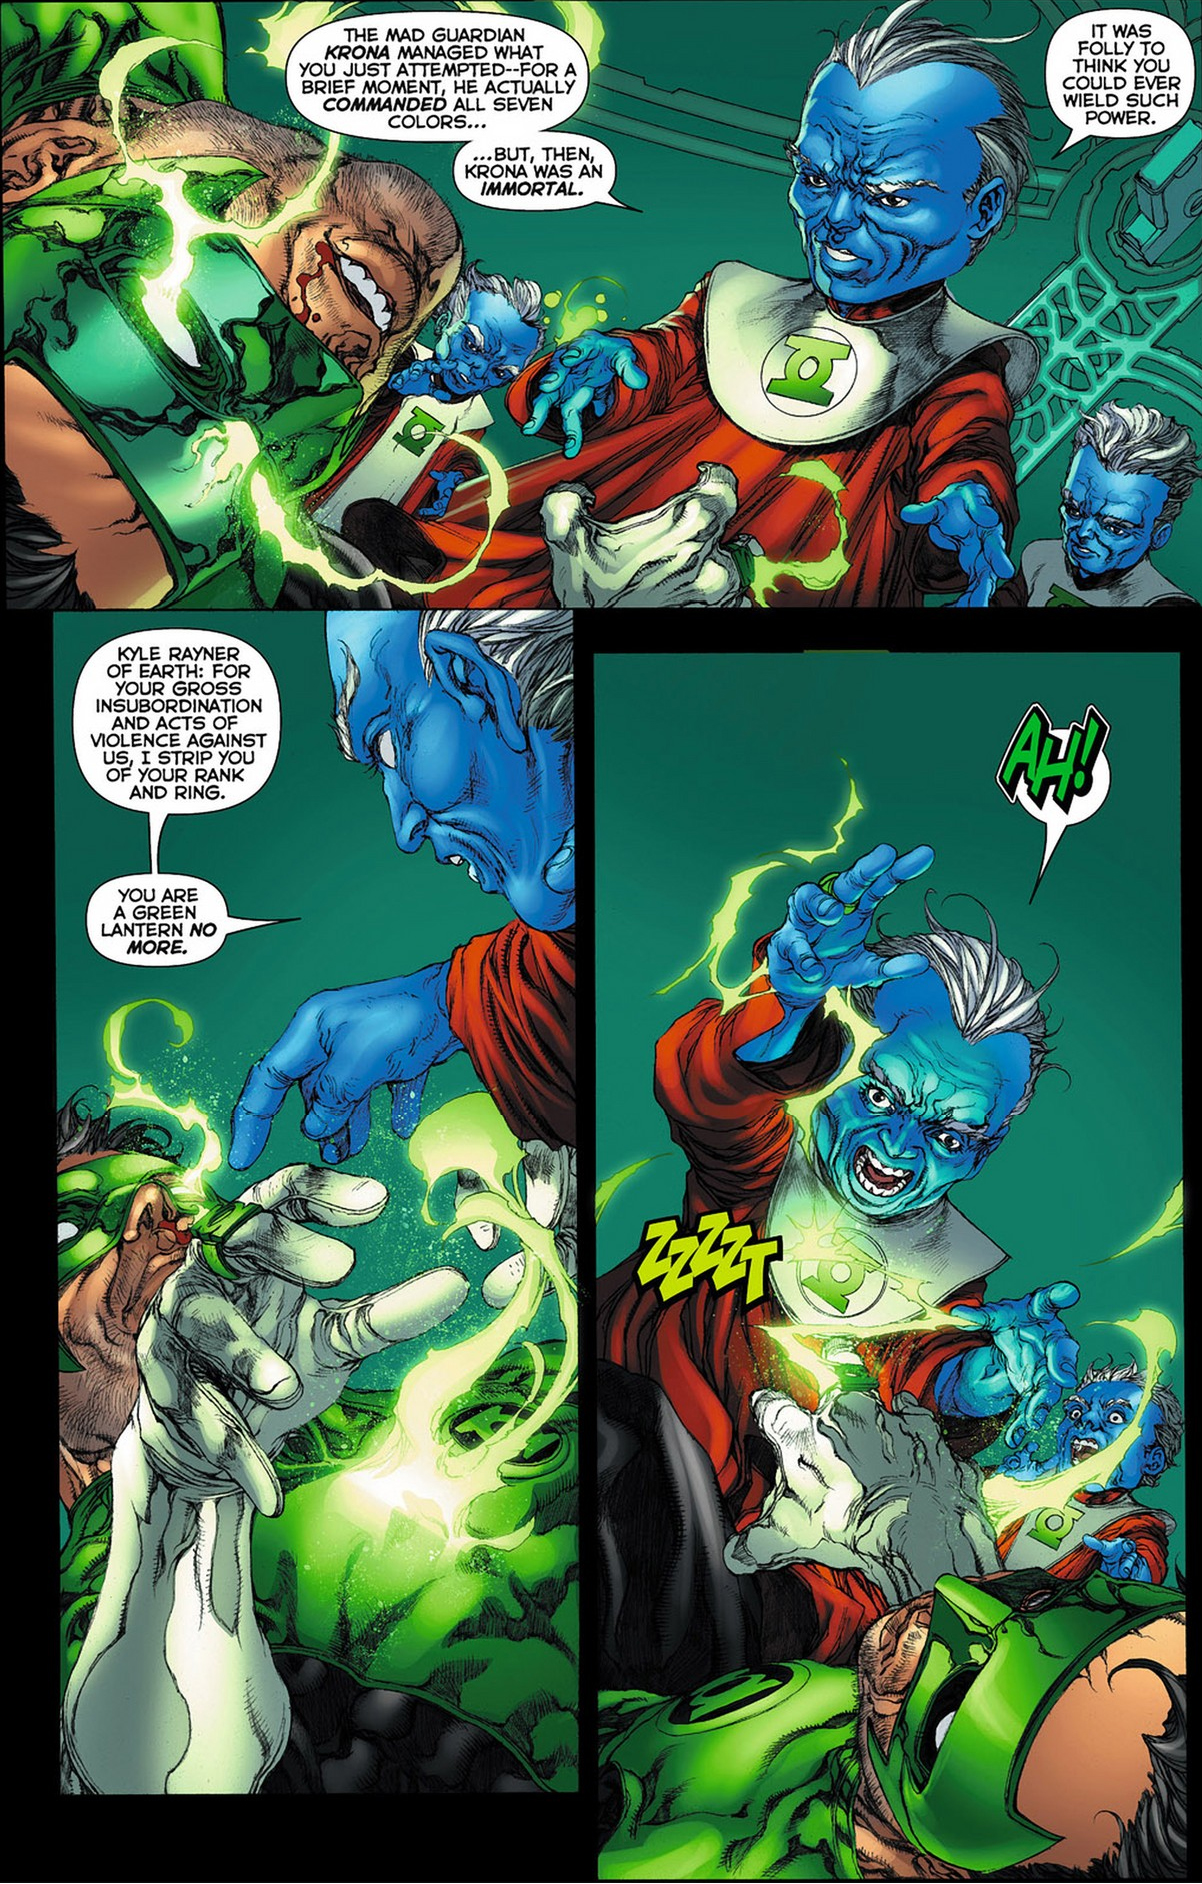 kyle rayner vs the guardians of the universe